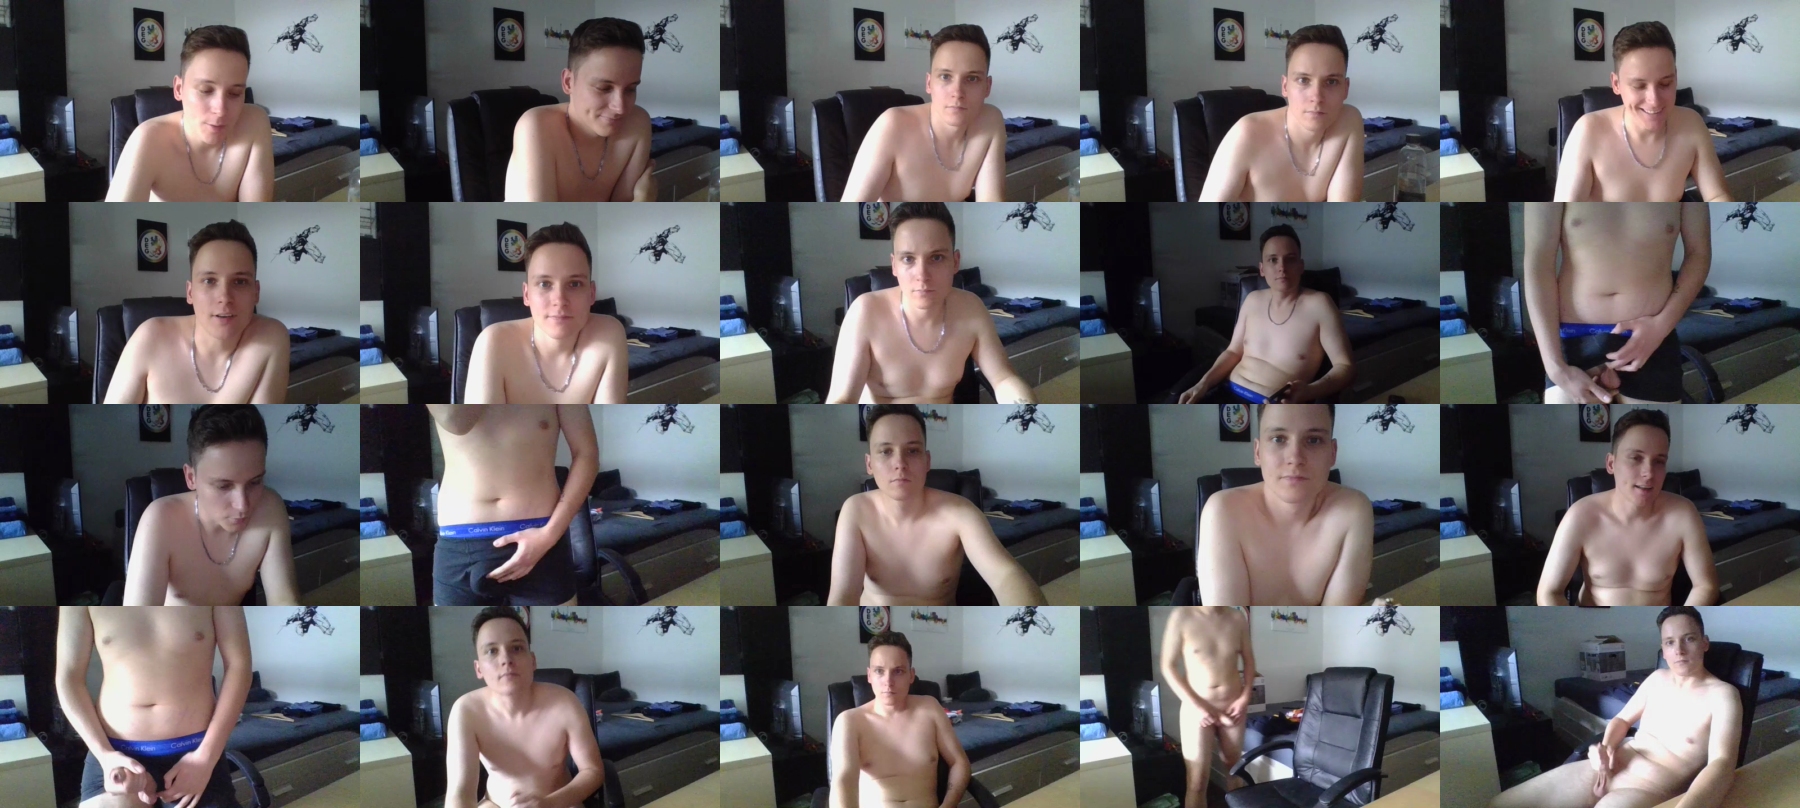 justin958  11-09-2021 Recorded Video Topless